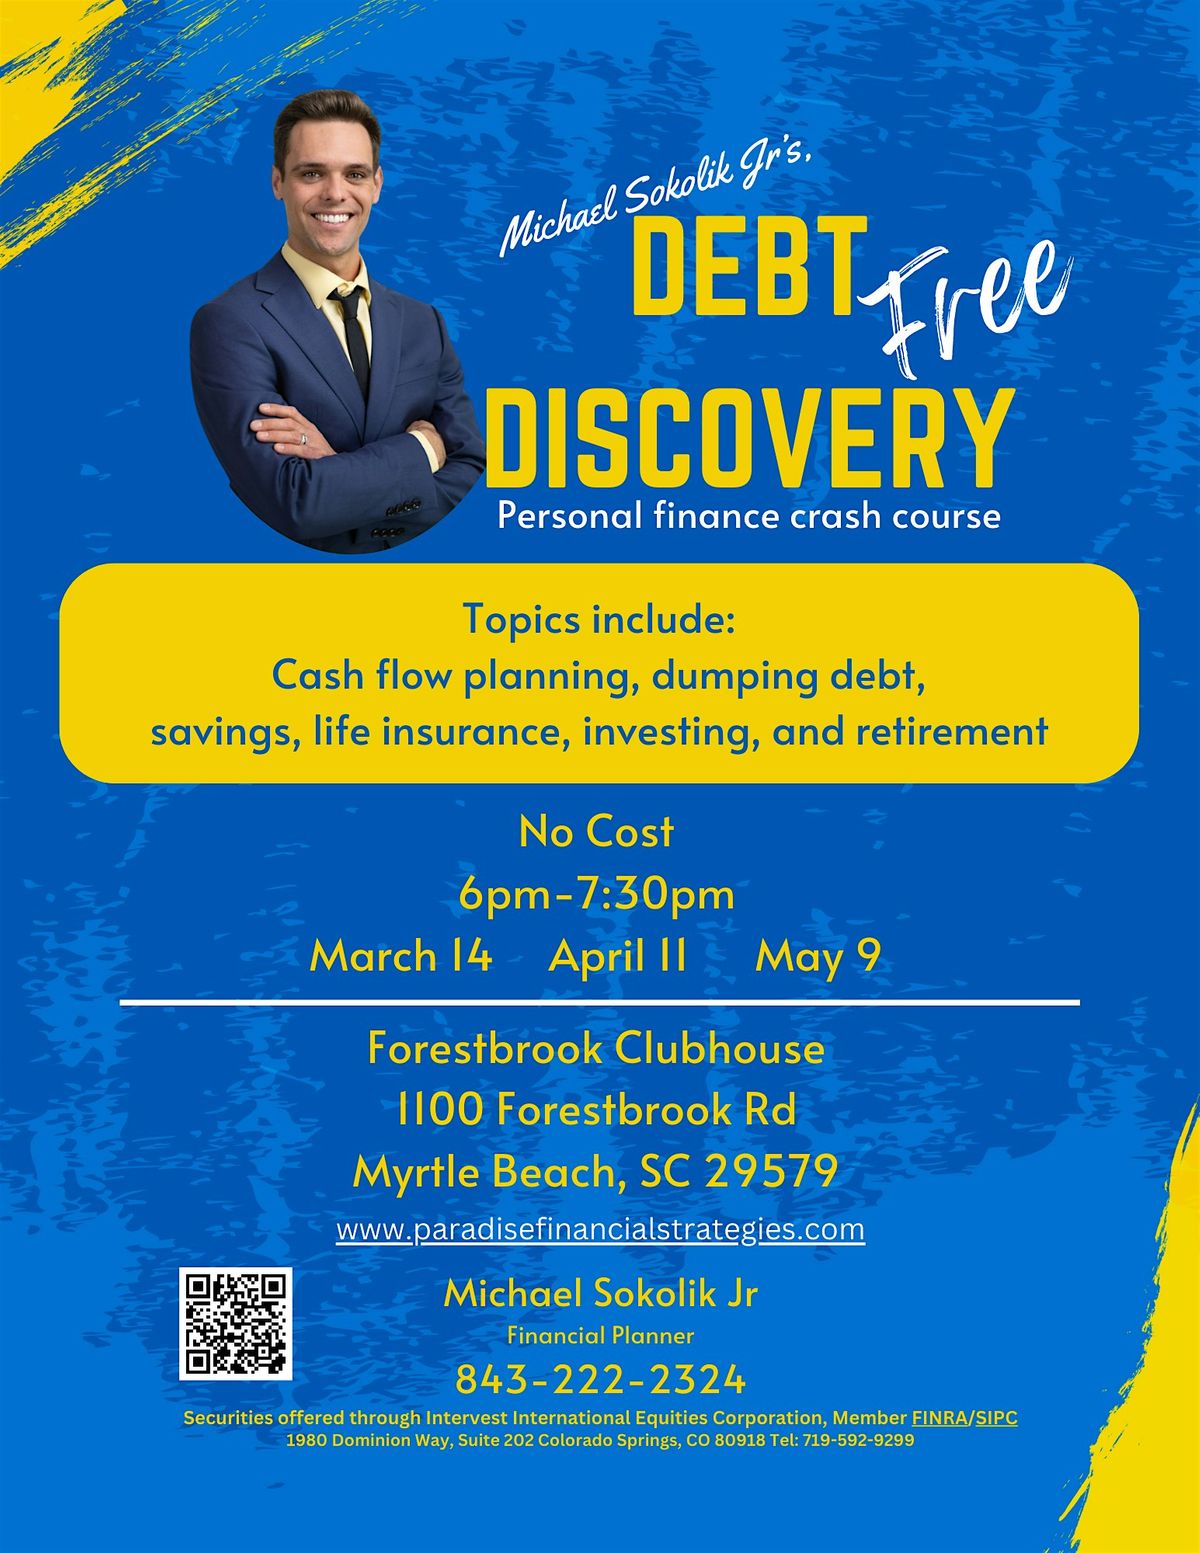 The Debt Free Discovery: Personal Finance Crash Course